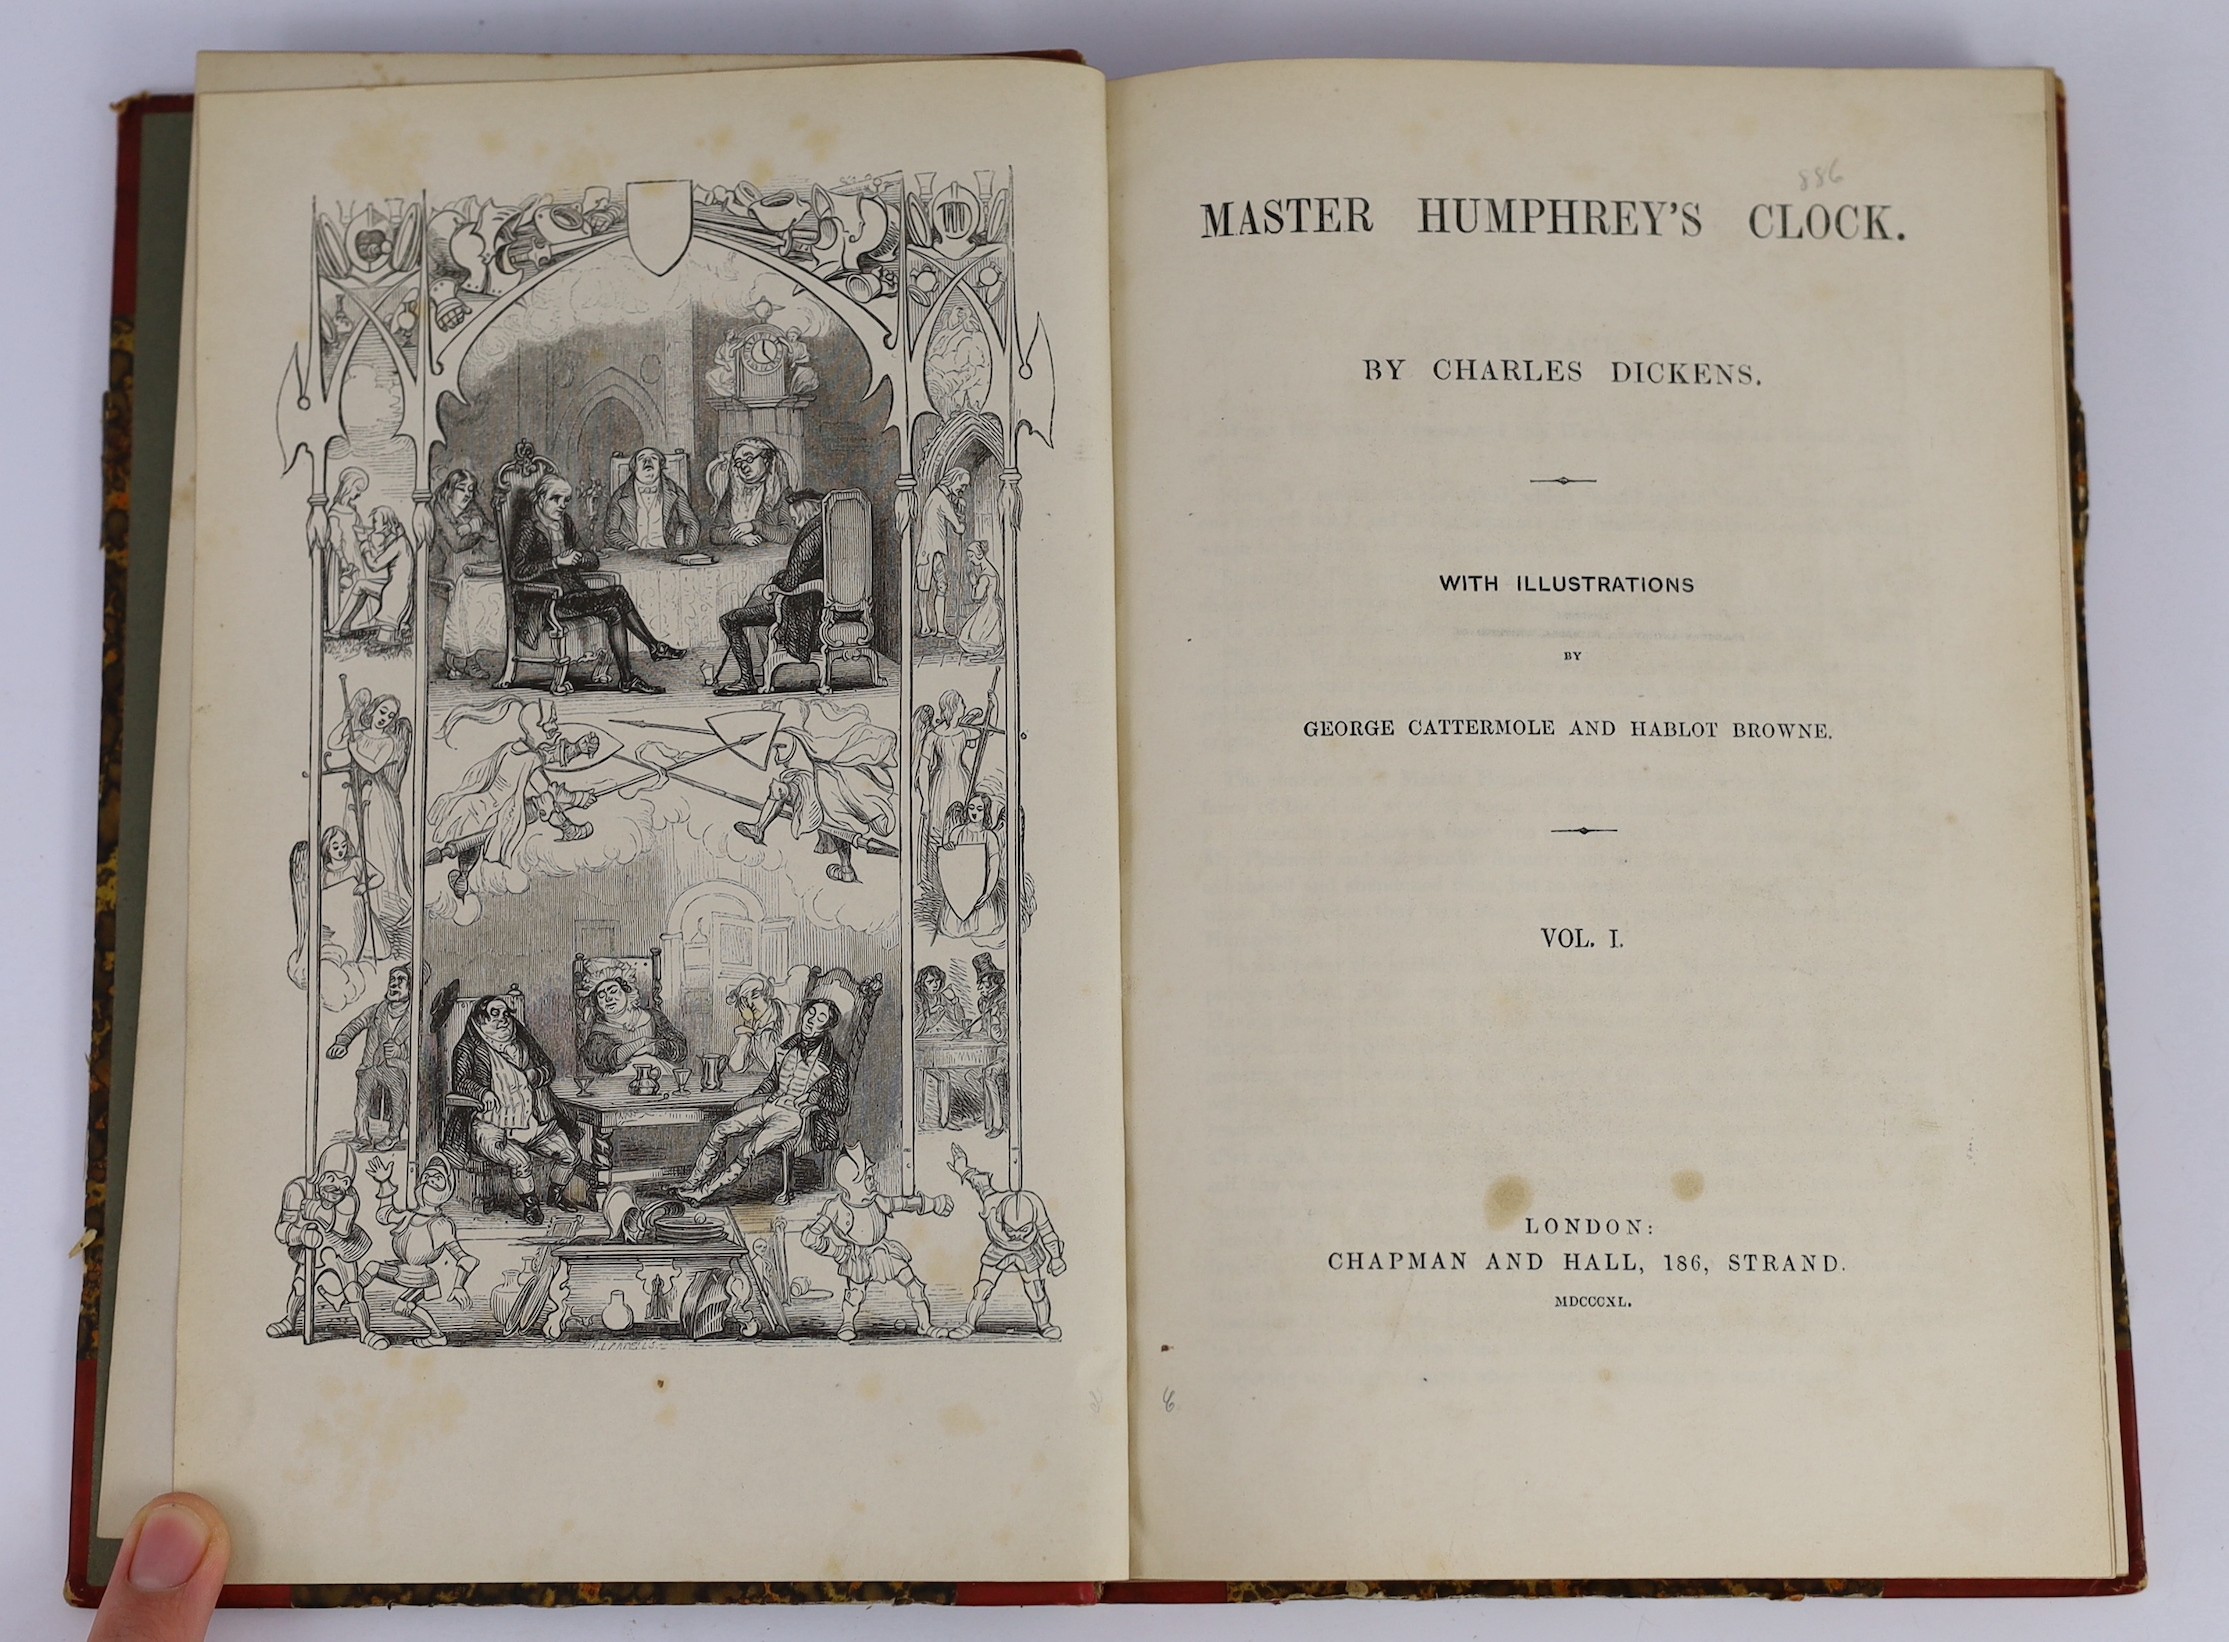 Dickens, Charles - Master Humphrey’s Clock, 1st edition in book form, 3 vols, quarter red calf with marbled boards, illustrated by George Cattermole and Halbot K. Browne (‘’Phiz’’), Chapman and Hall, London, 1840-41